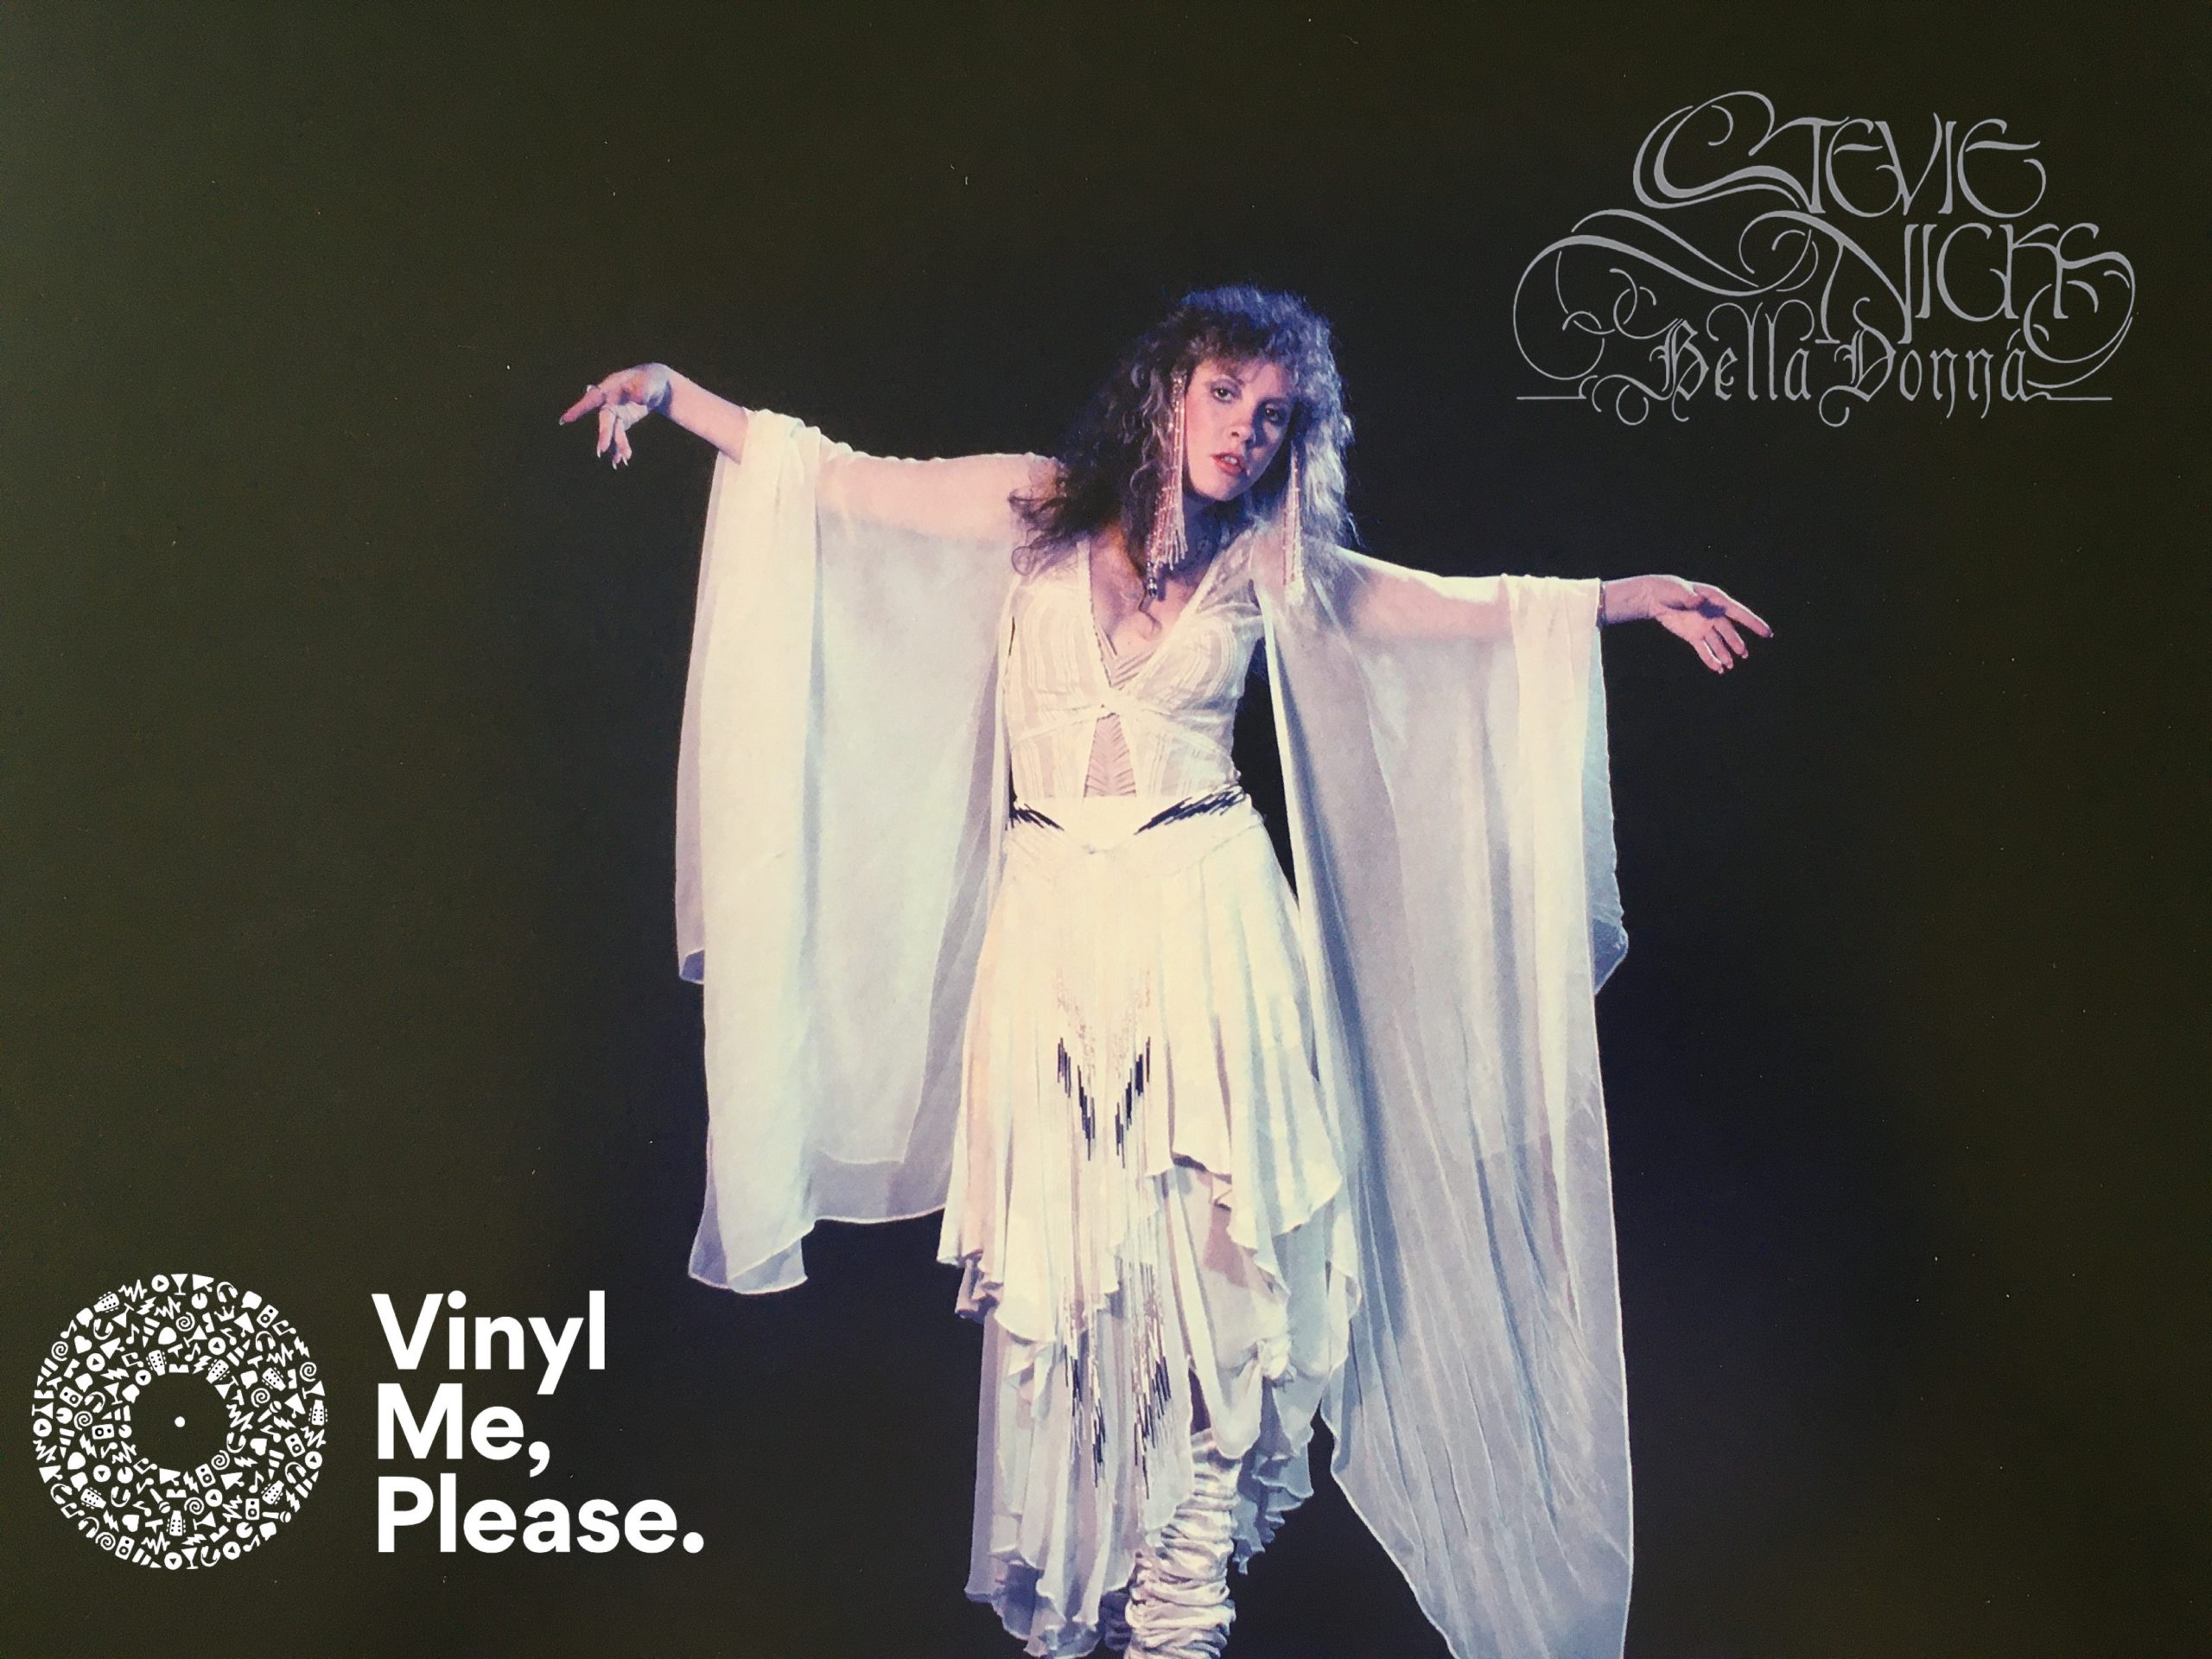 Geek insider, geekinsider, geekinsider. Com,, vinyl me, please may edition: stevie nicks - 'bella donna', entertainment